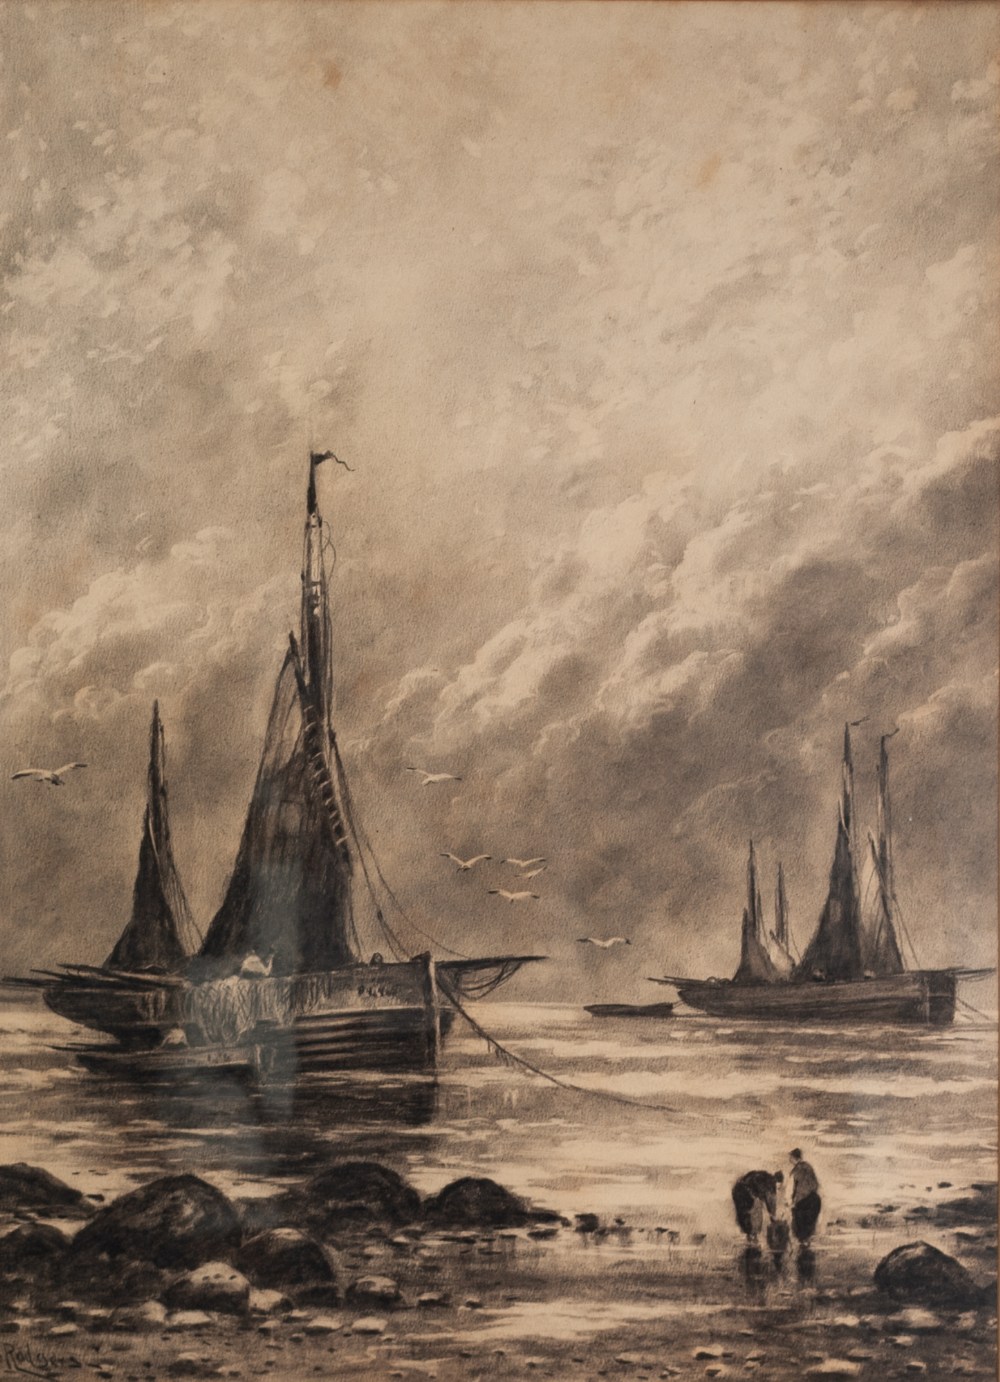 S. RODGERS (LATE 19th/EARLY 20th CENTURY) CHARCOAL DRAWING Coastal scene with fishing boats and